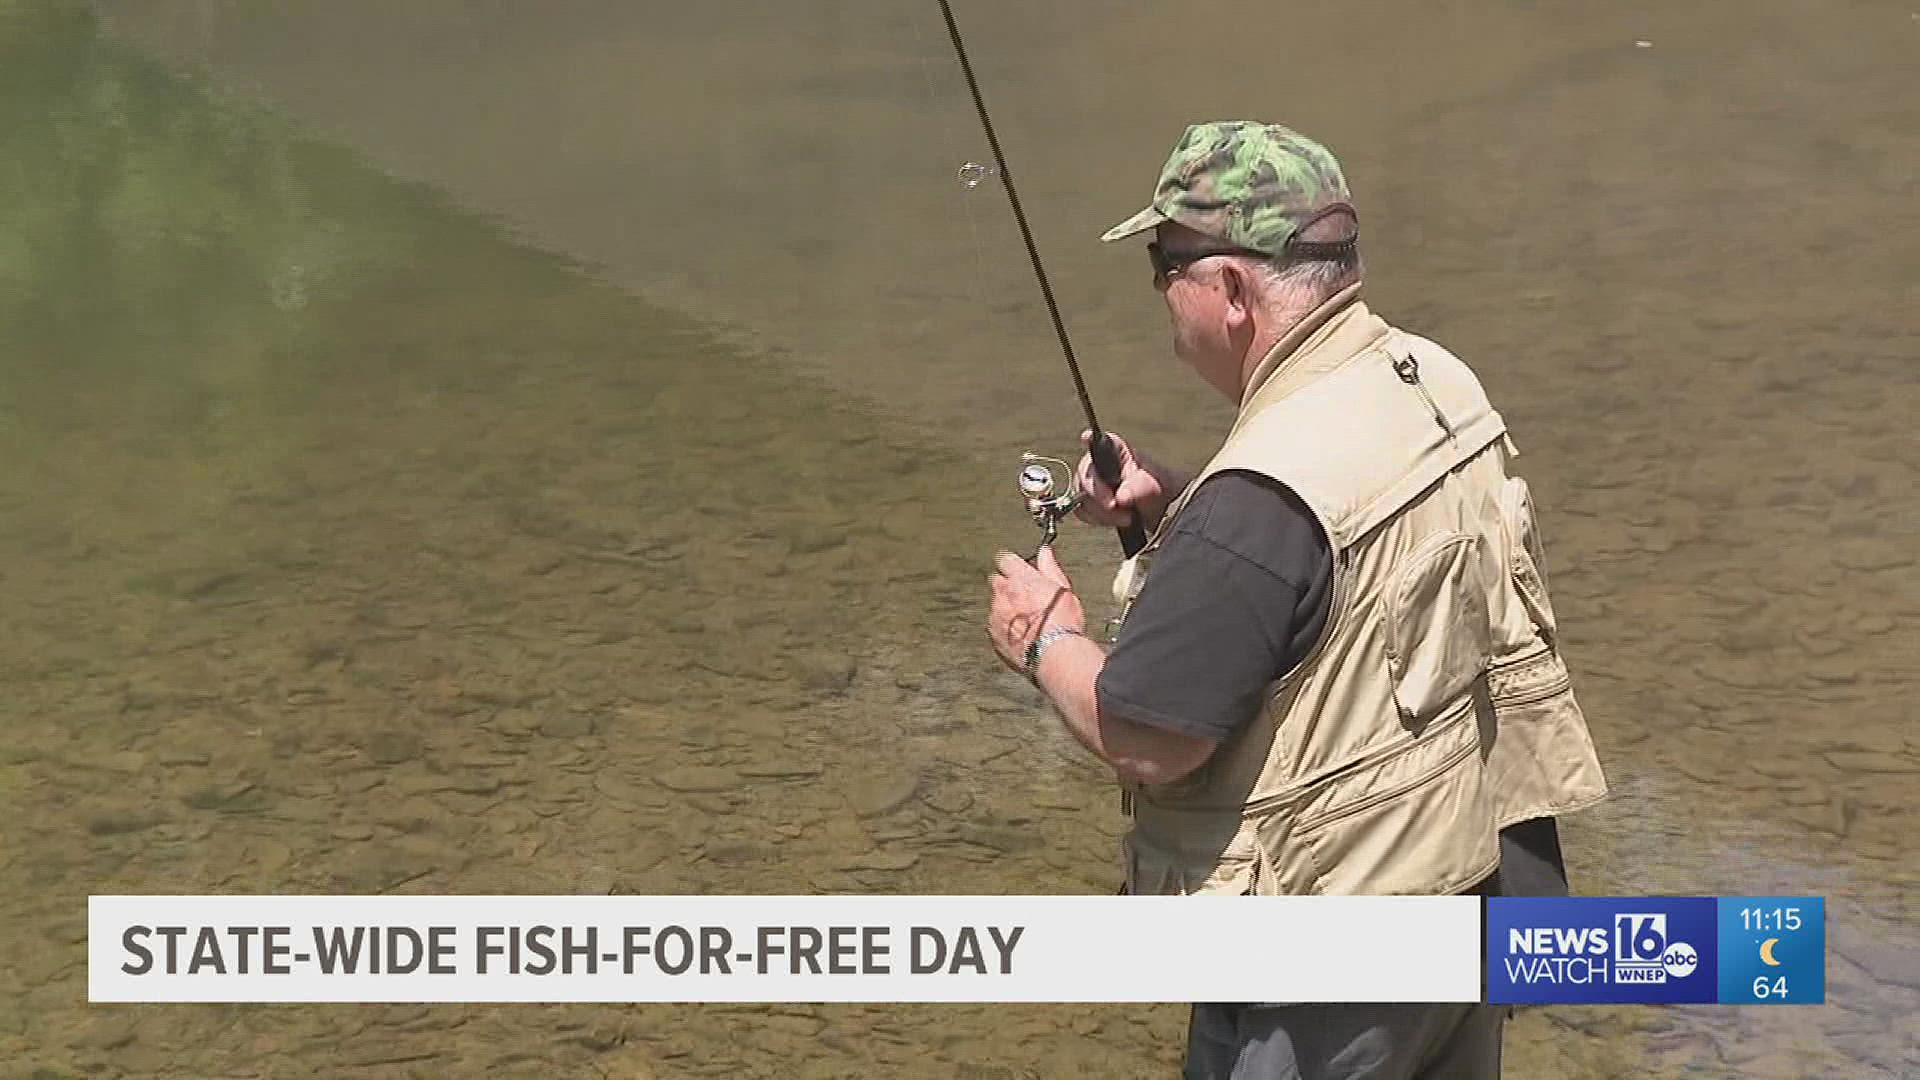 It was a free day of fishing across the state on Sunday. Newswatch 16 found anglers taking to the water at Mahoning Creek in Montour County.